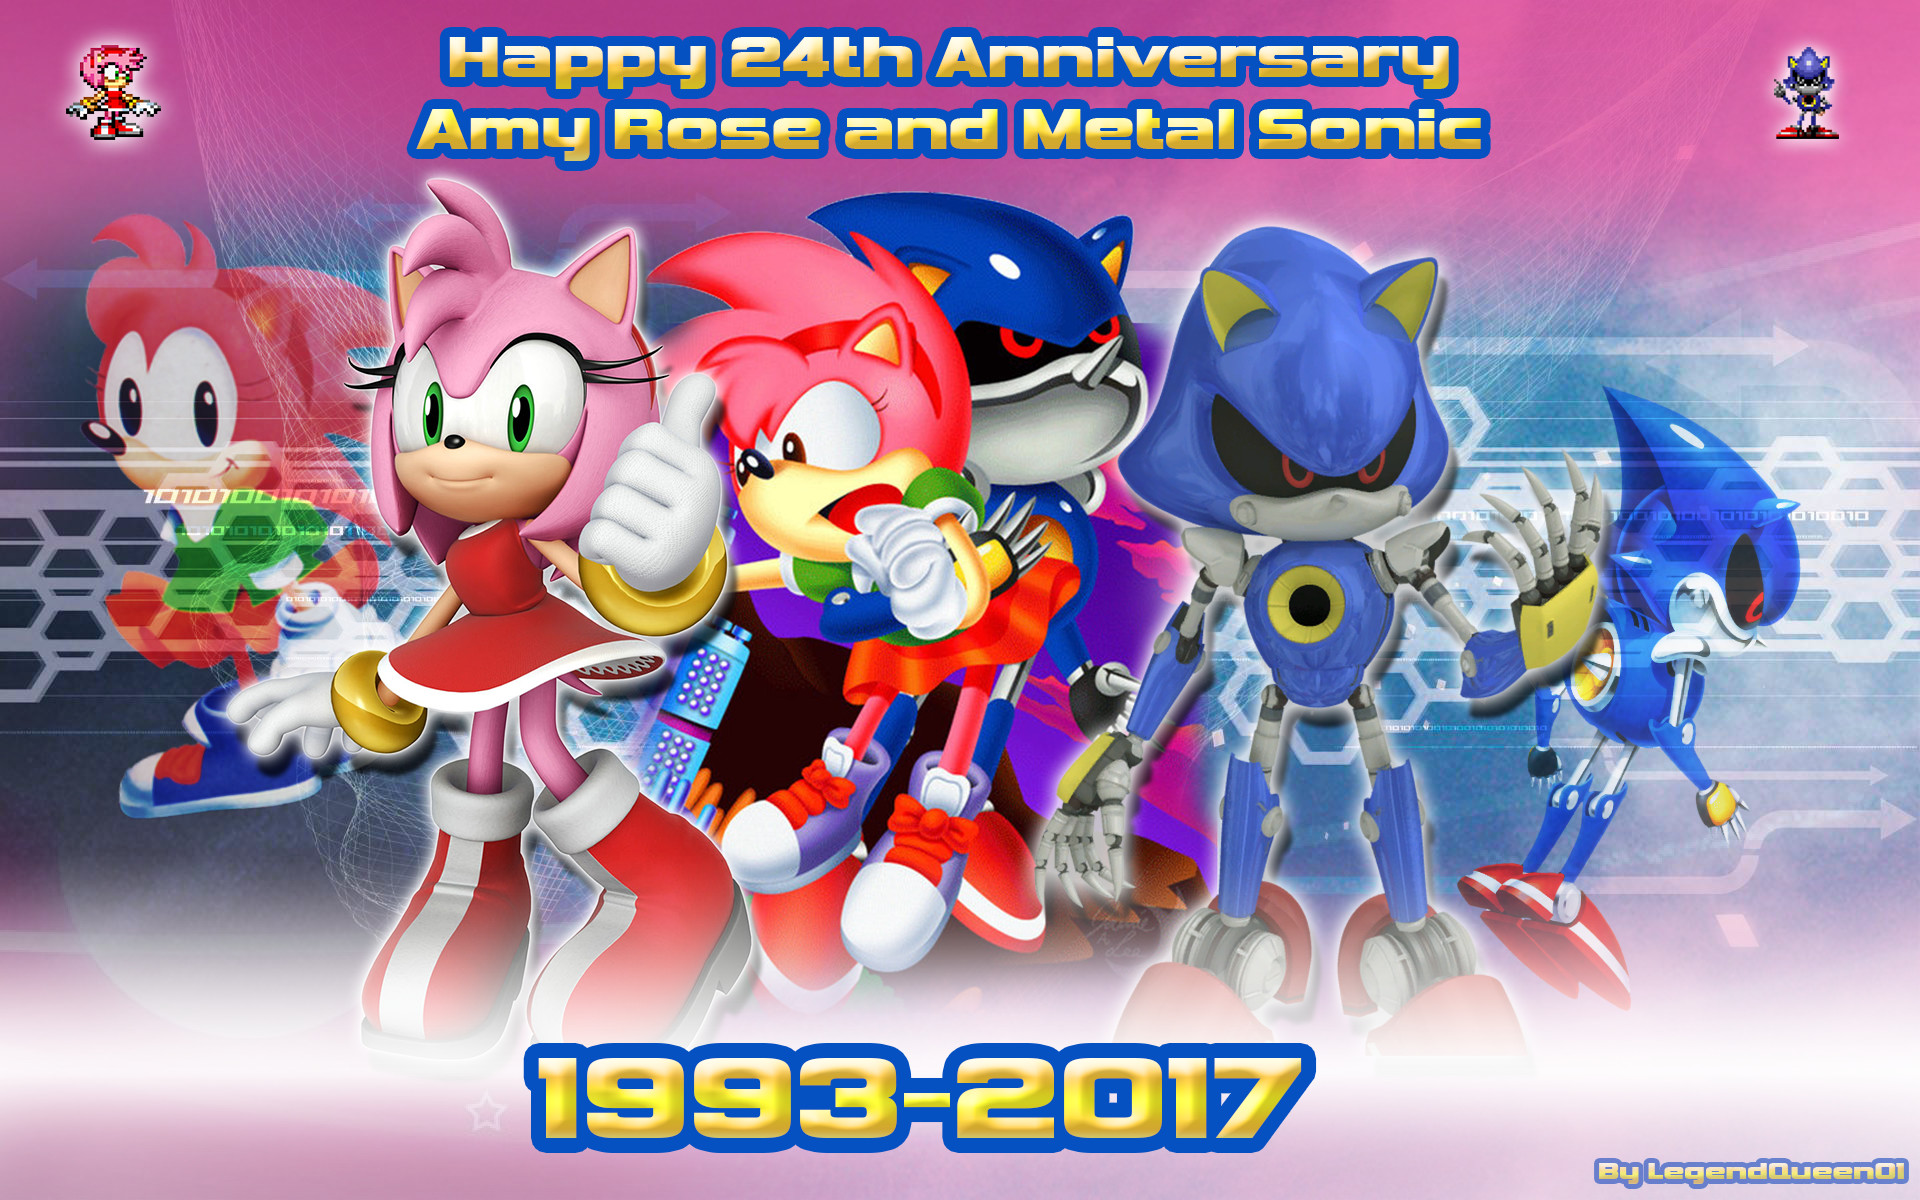 1920x1200 ... Wallpaper Anniversary Amy Rose and Metal Sonic by LegendQueen01